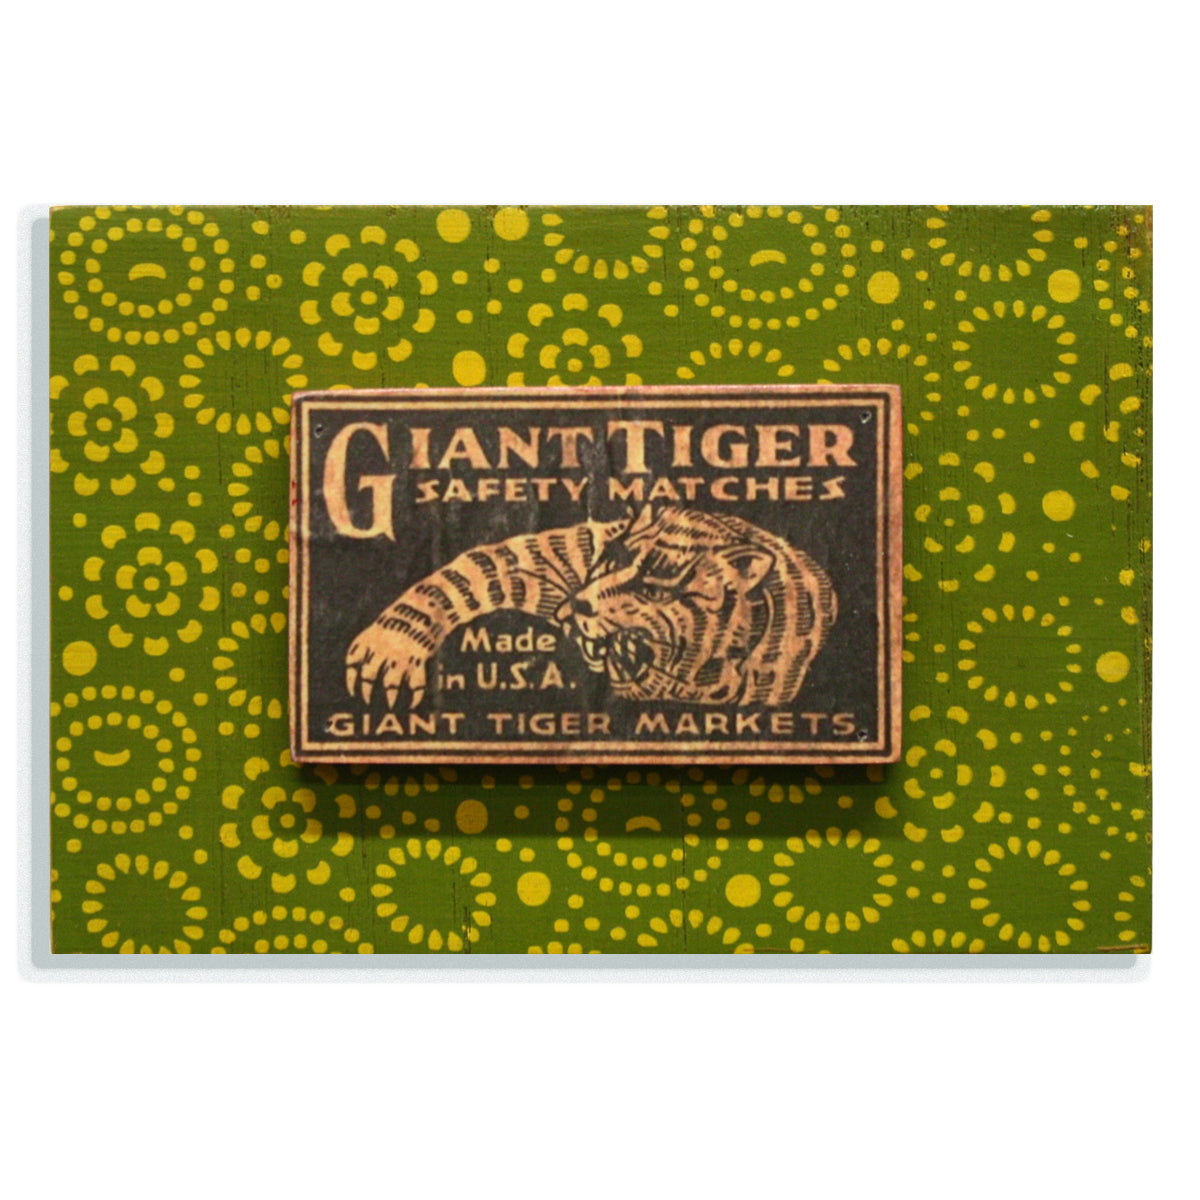 Giant Tiger on green